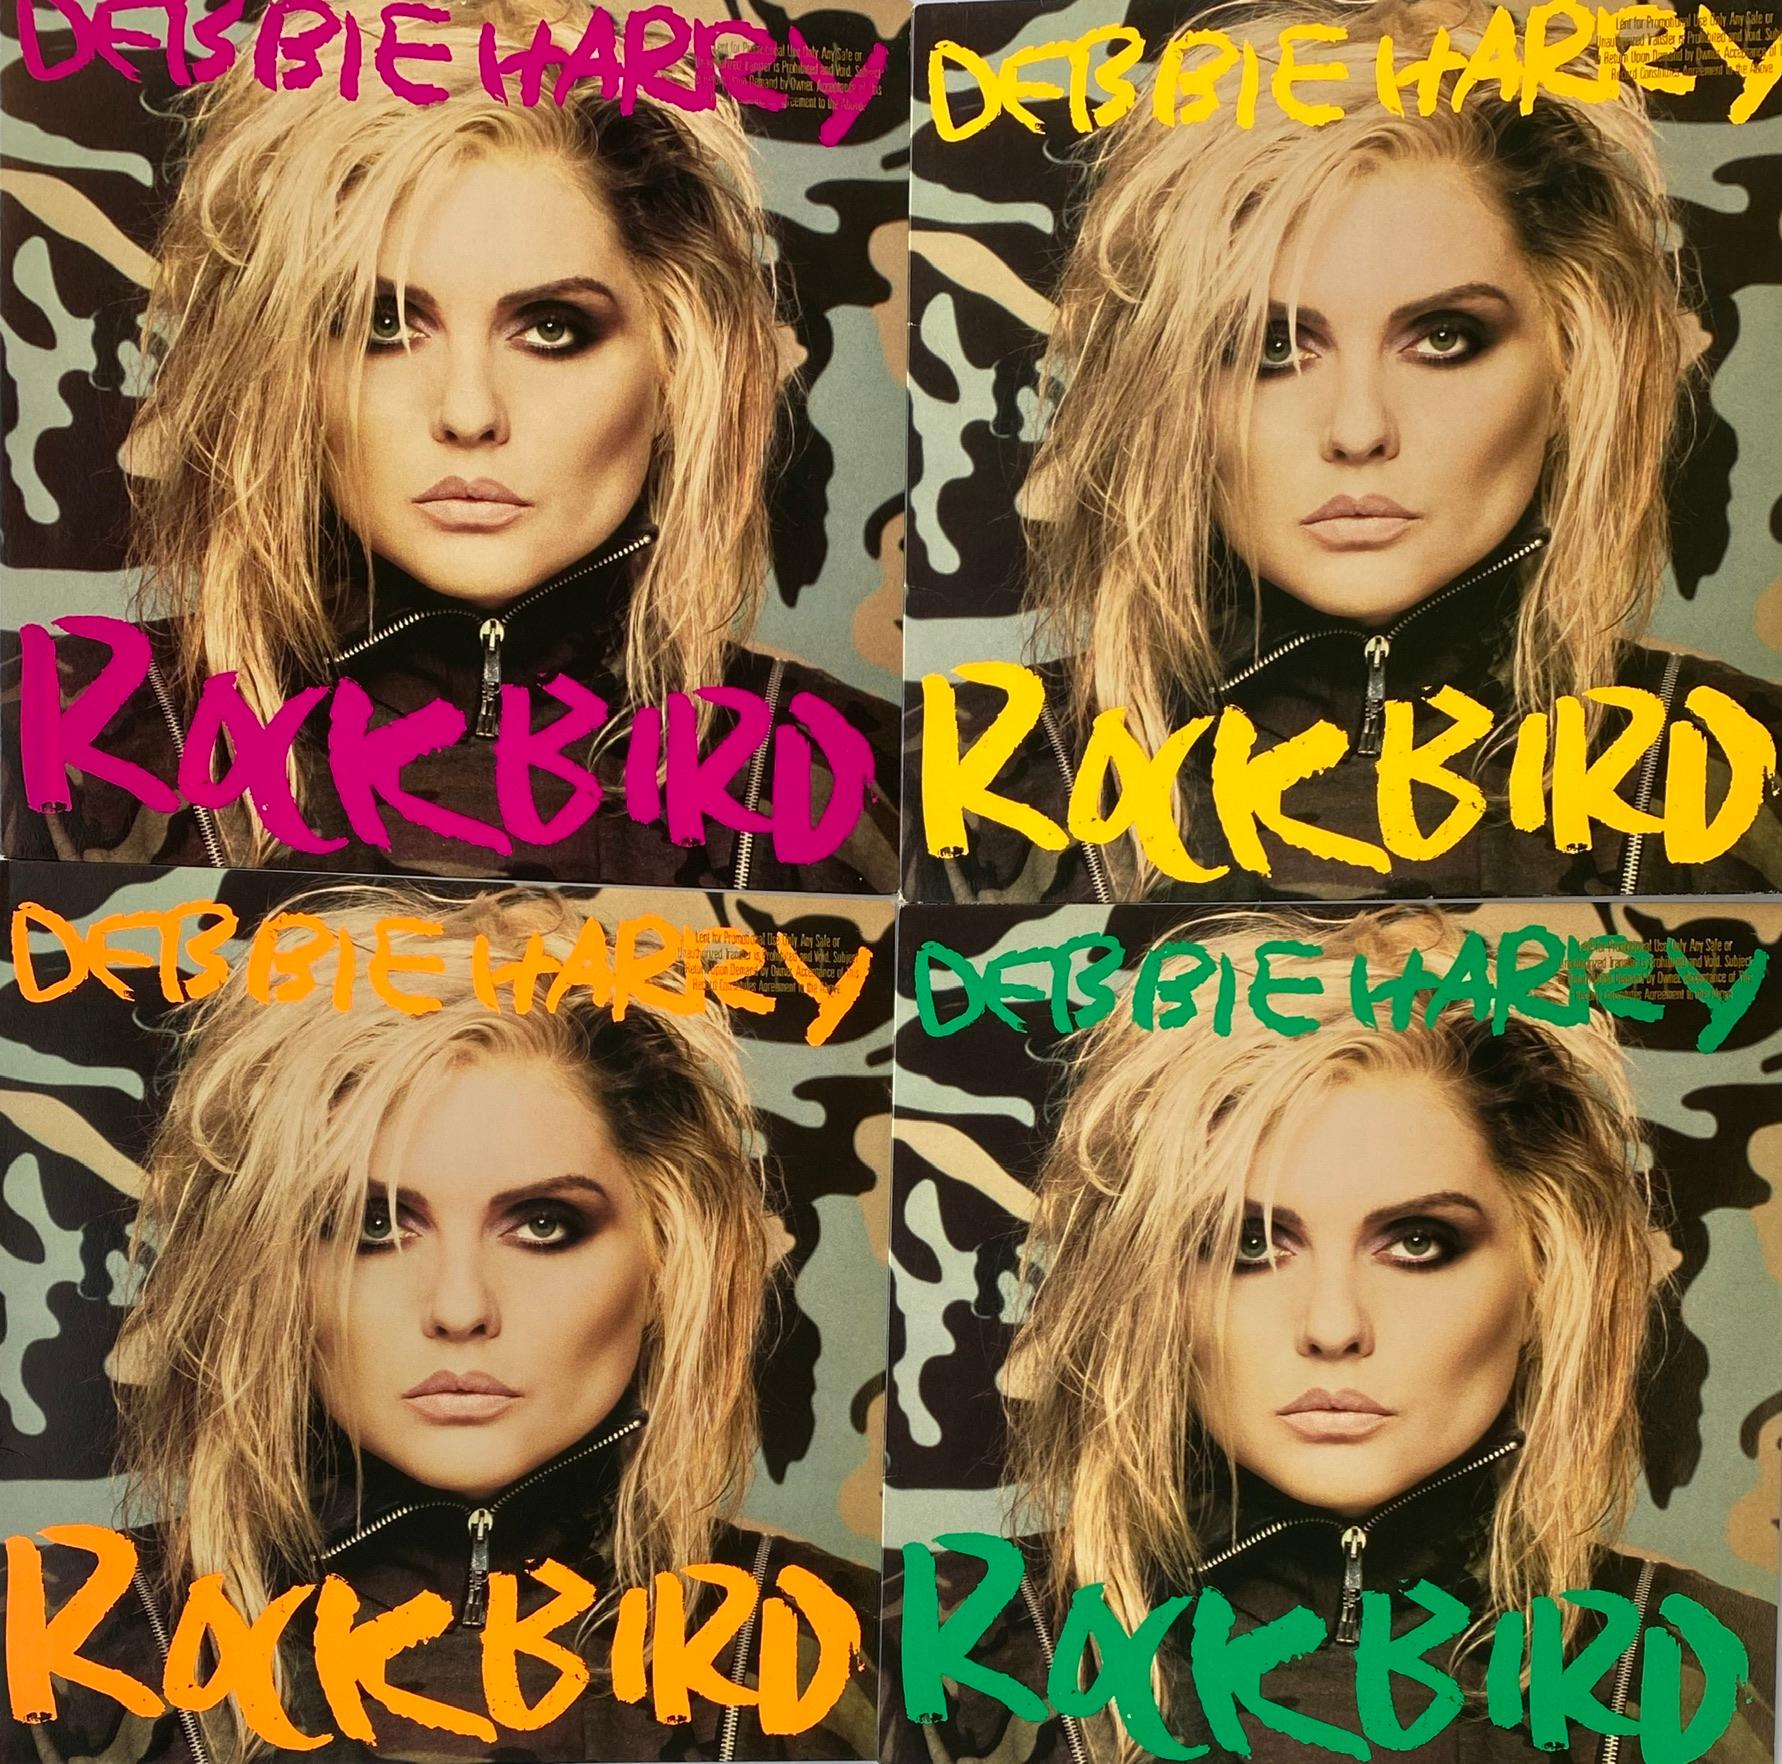 Debbie Harry
Rockbird, 1986
Vinyl, LP, Album’s (set of 4 works).
Cover art designed by Andy Warhol and Stephen Sprouse.

Set of 4 individual albums (Pink, Yellow, Orange, & Green text)
12 x 12 Inches / 30.48 x 30.48 cm (applies to each individual).